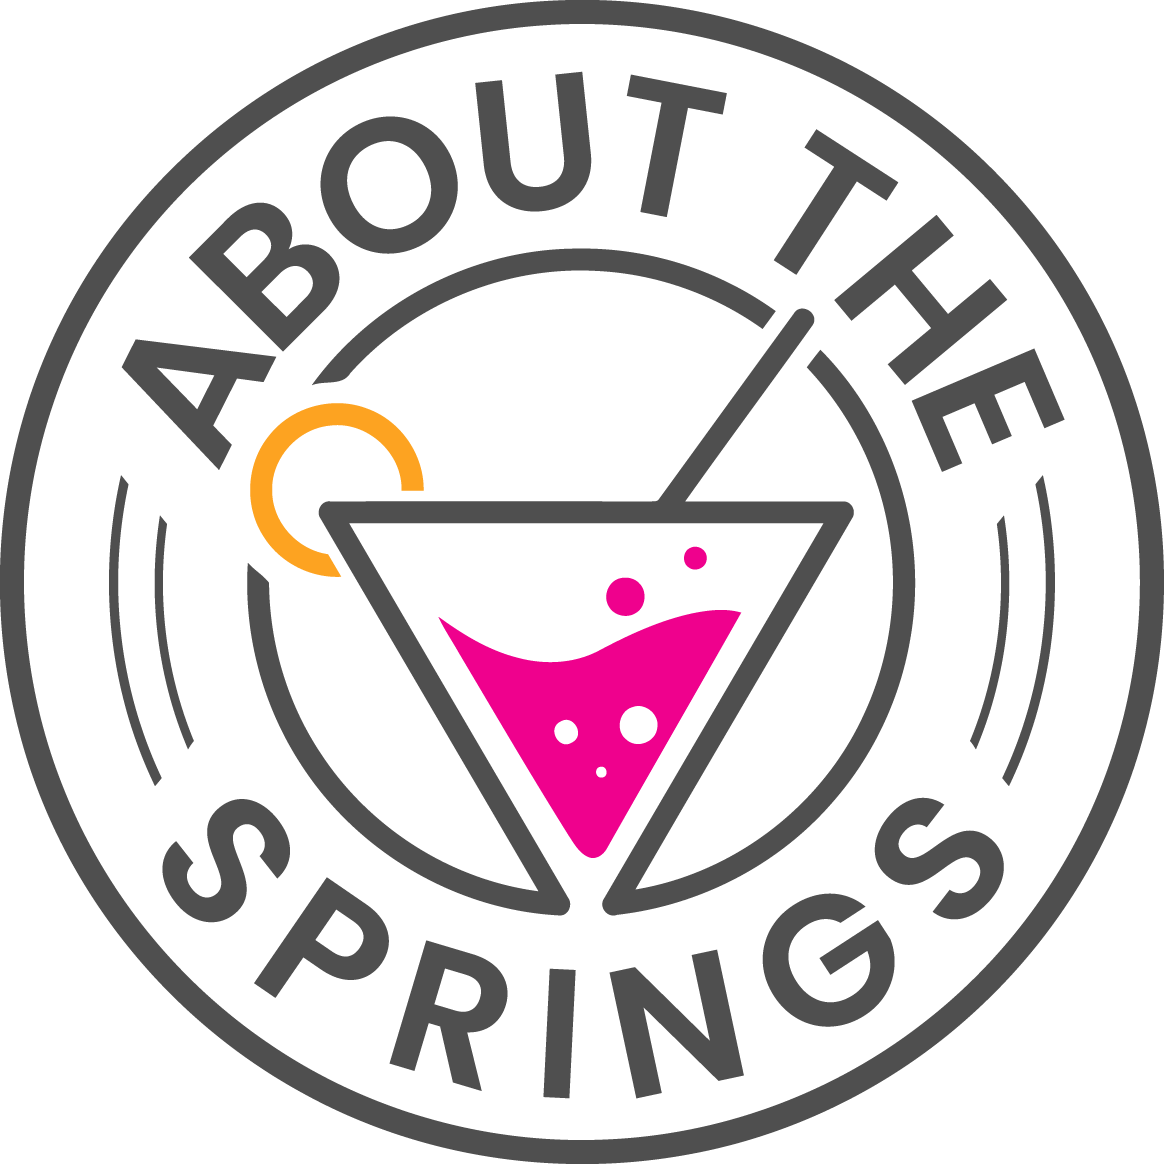 About the Springs